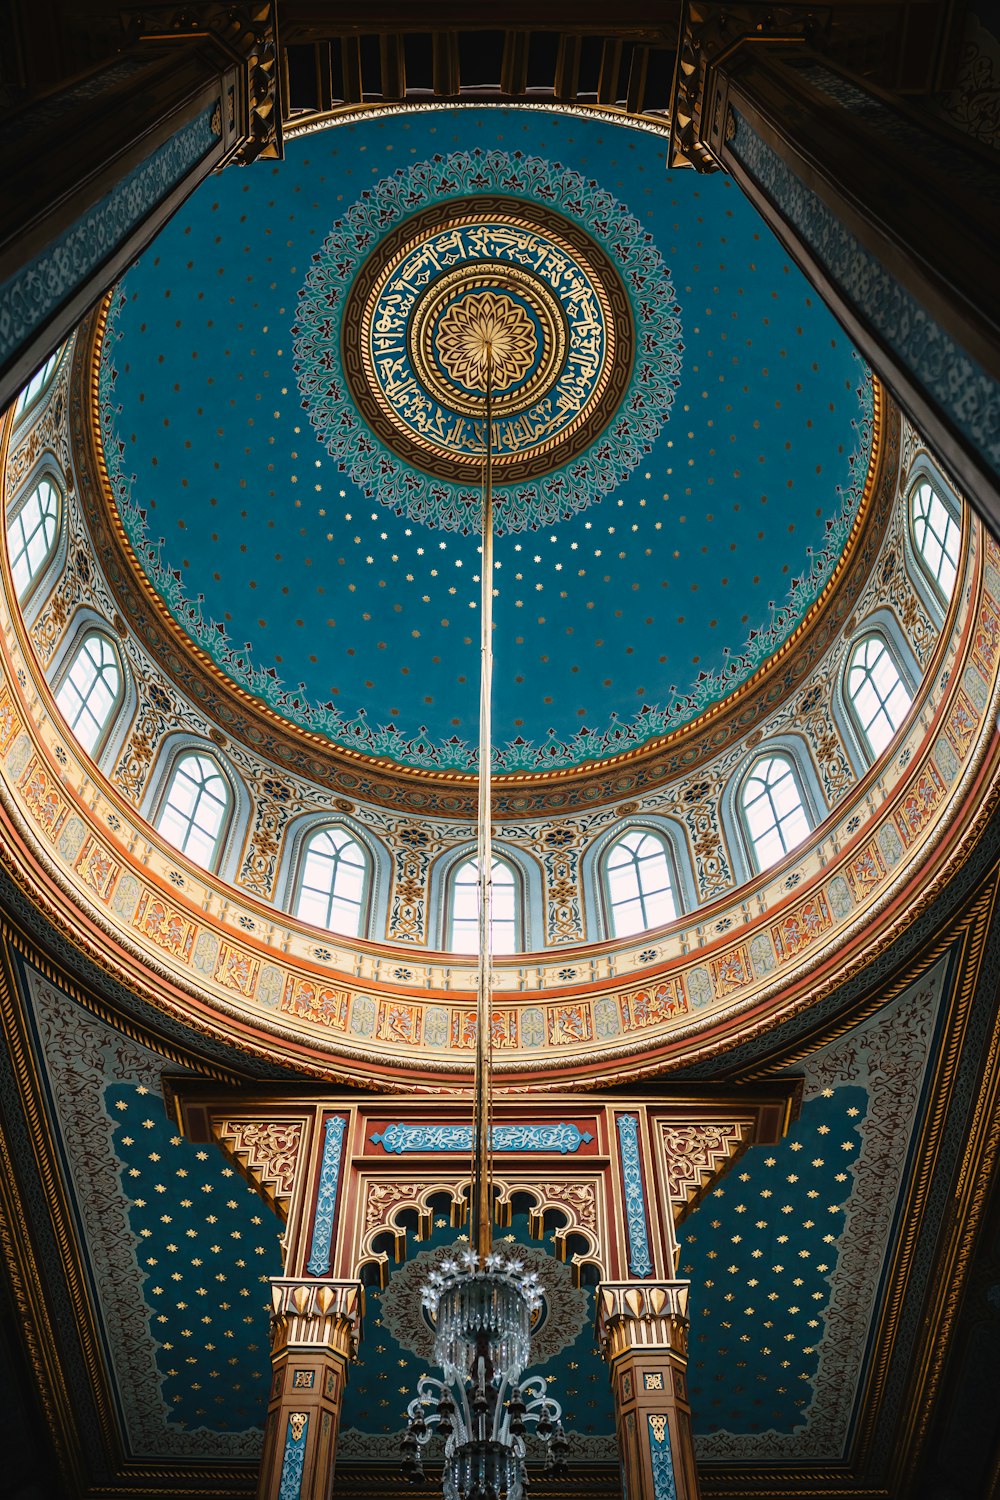 a large dome with a clock on the side of it